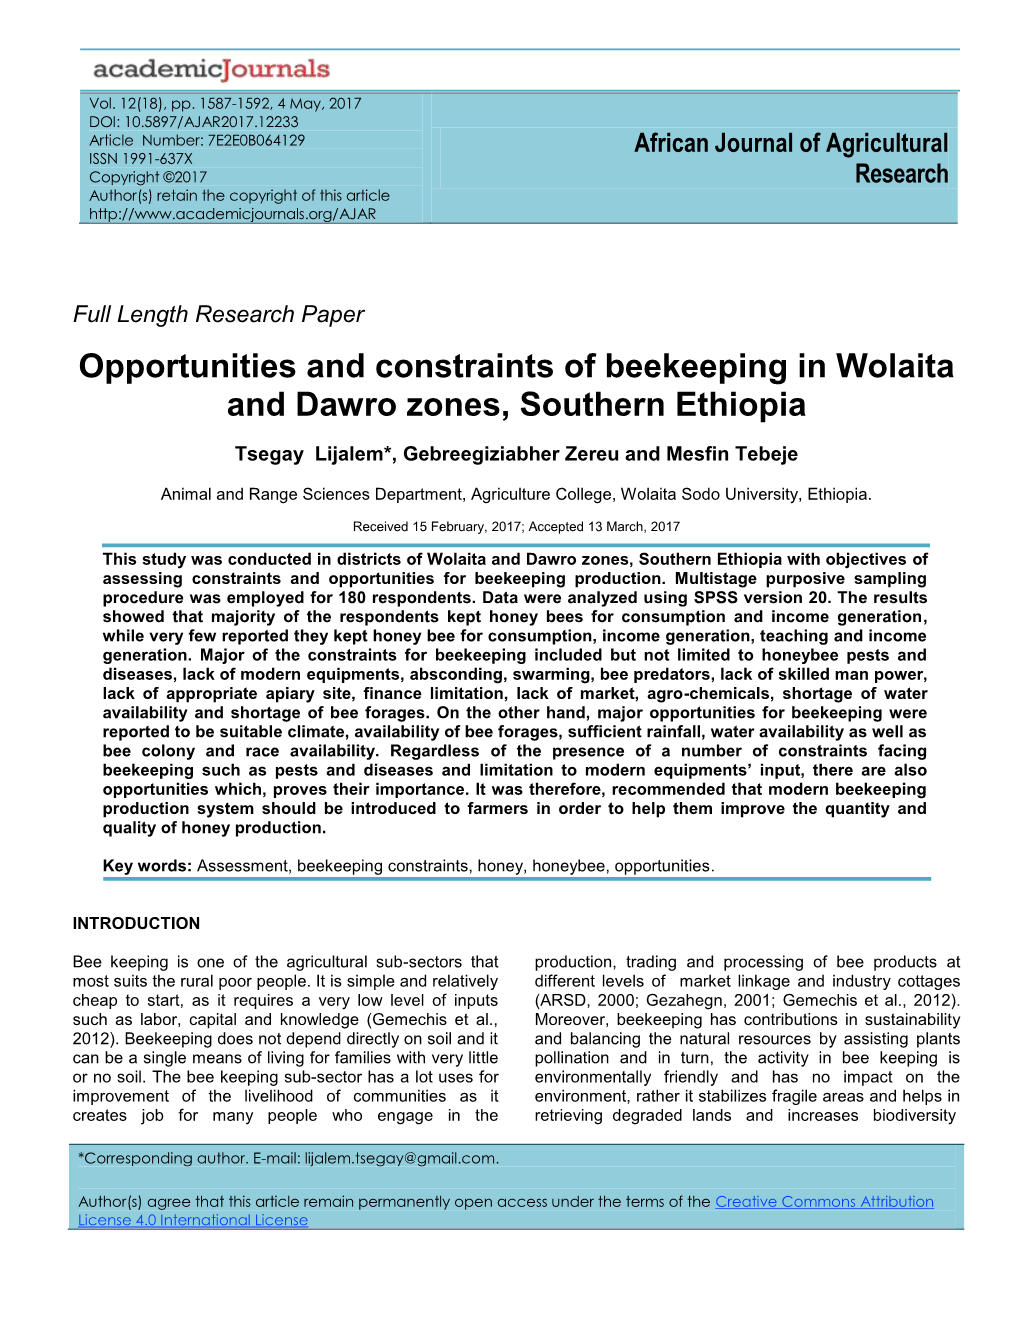 Opportunities and Constraints of Beekeeping in Wolaita and Dawro Zones, Southern Ethiopia